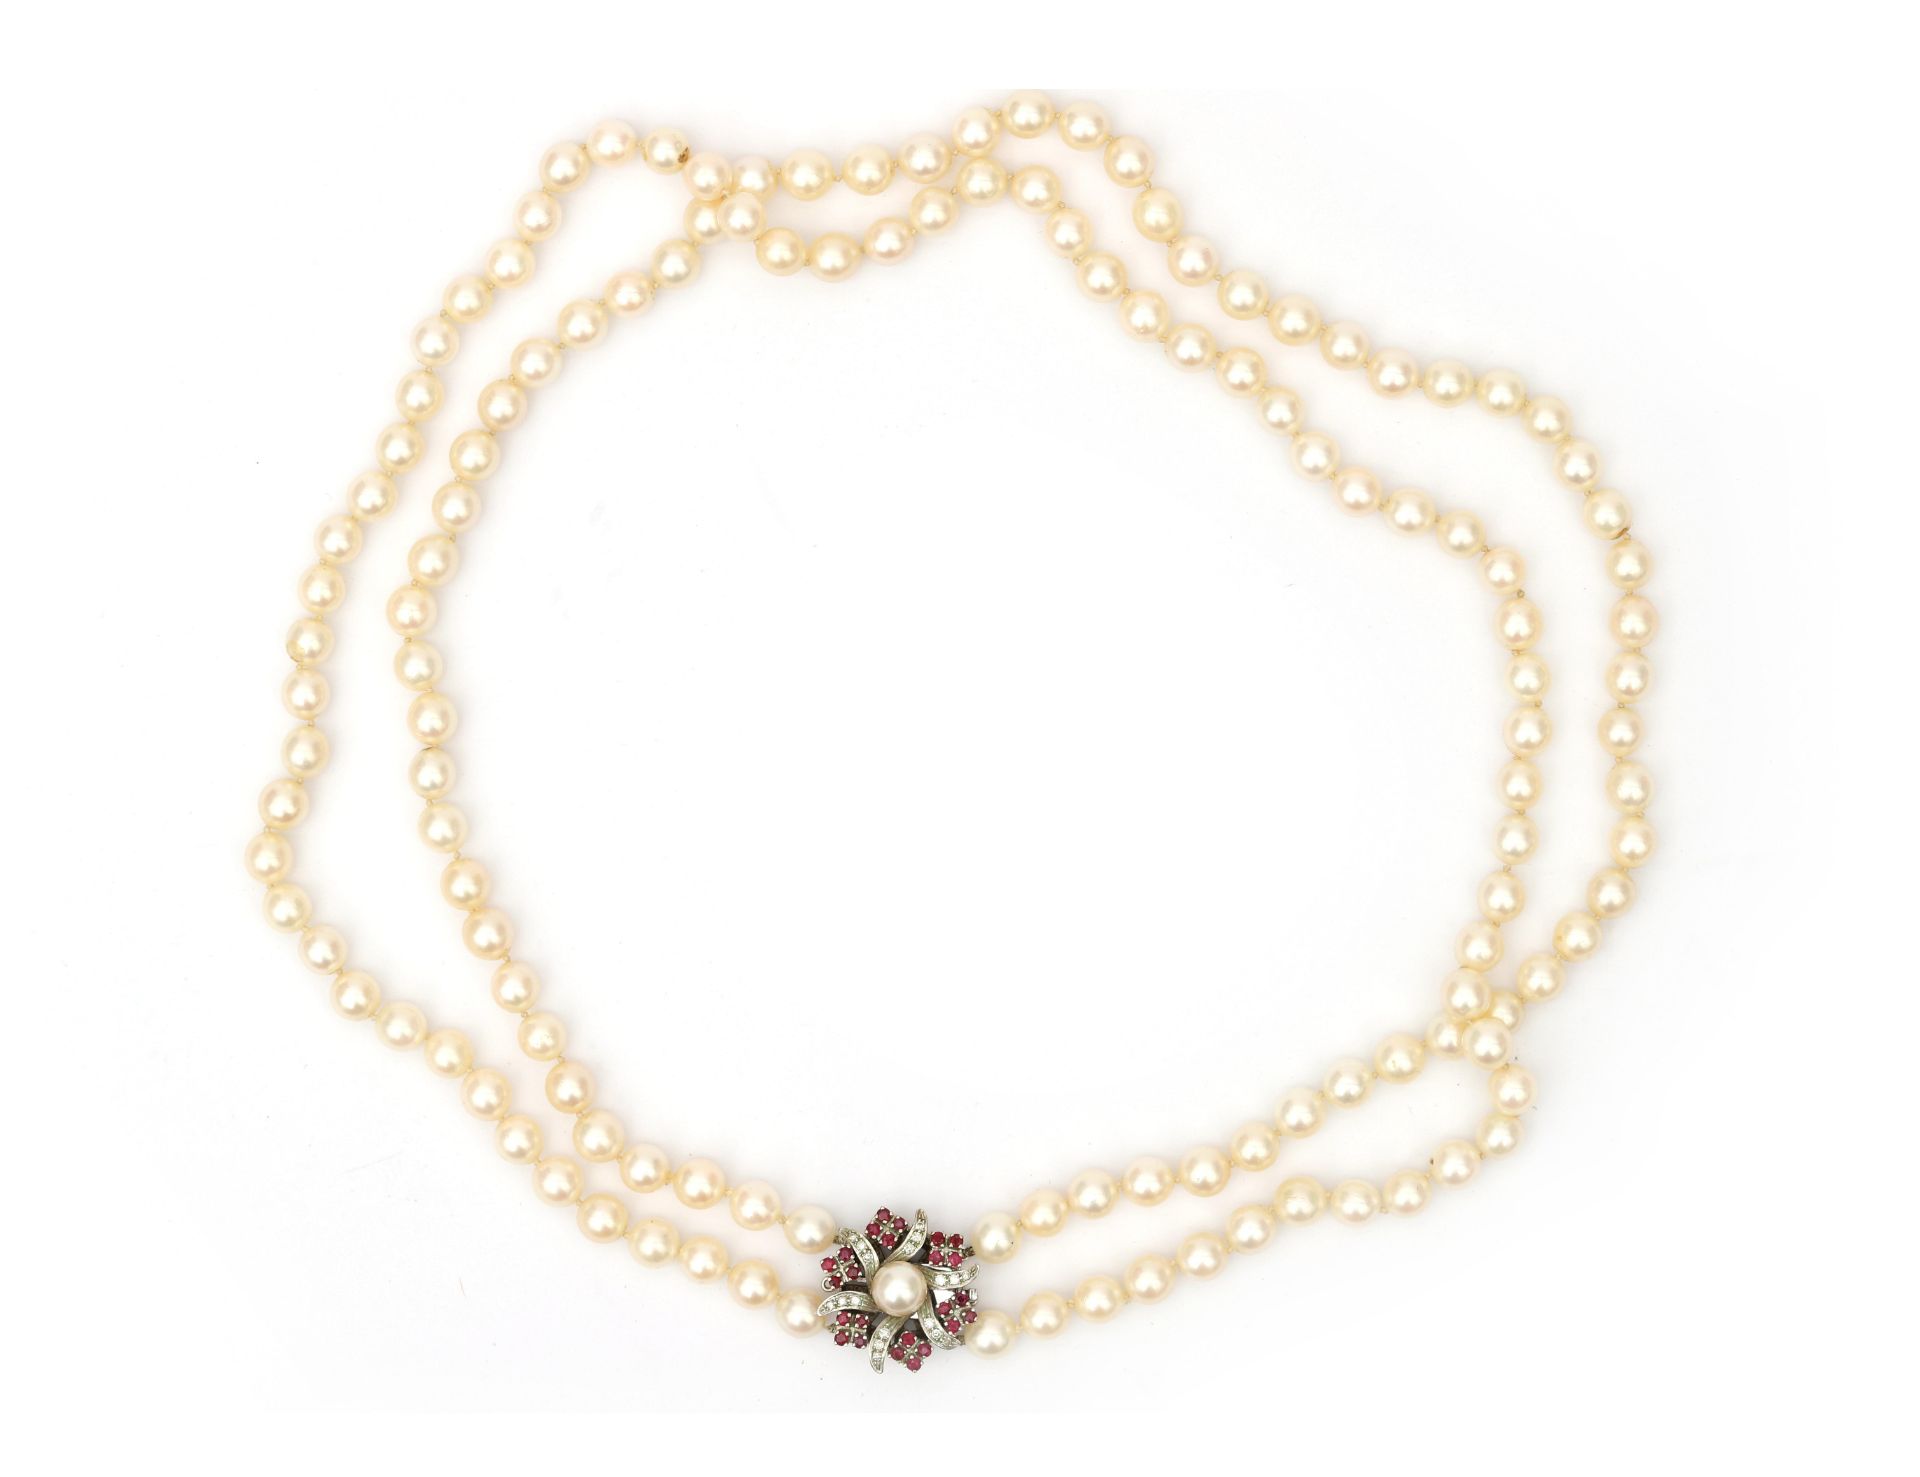 A cultured pearl necklace to a ruby and diamond white gold clasp. Featuring two knotted strands of - Image 4 of 4